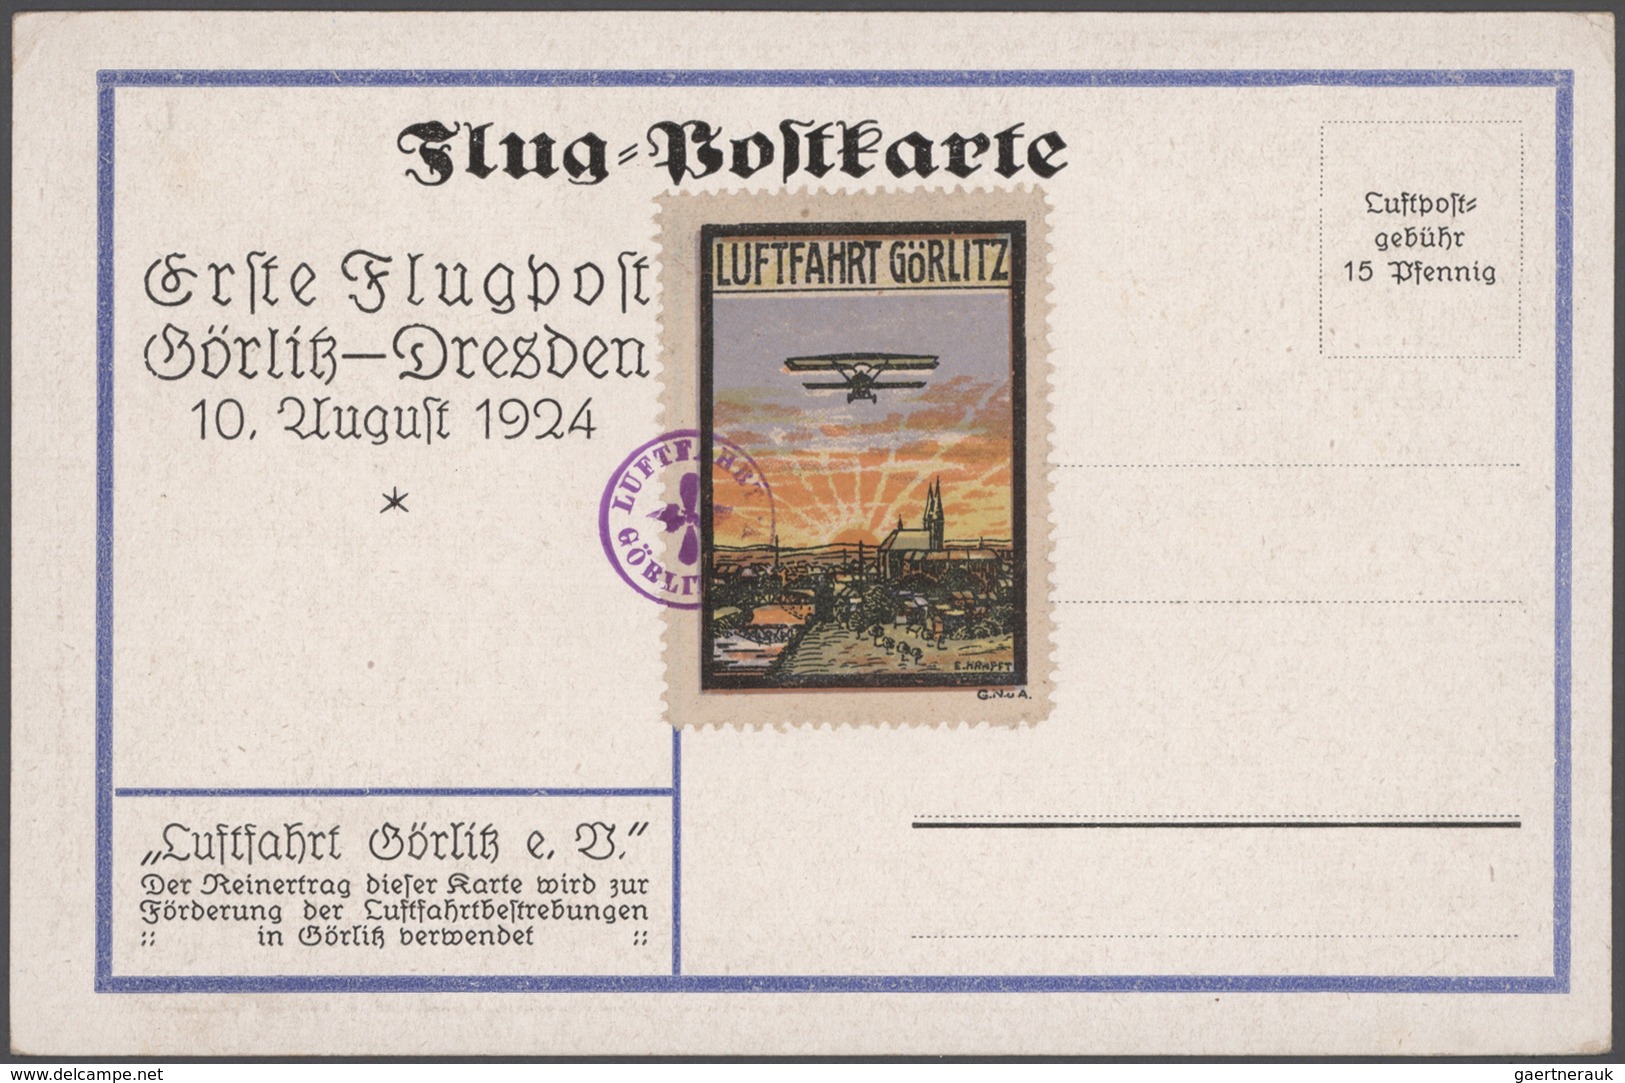 Flugpost Alle Welt: 1912/1975 (ca.), Airmail/Space, sophisticated holding of apprx. 100 covers/cards